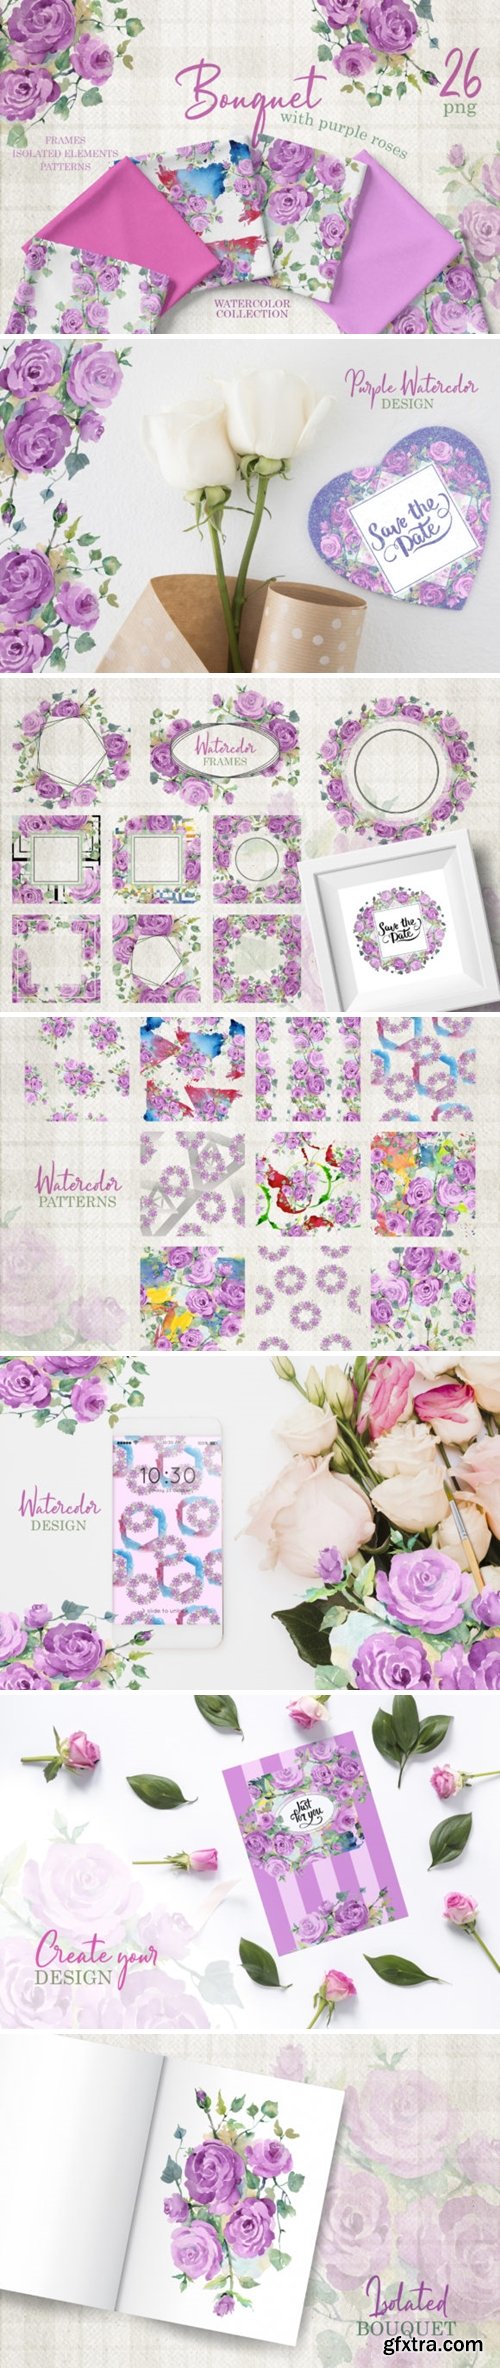 CM - Bouquet with Purple Roses Watercolor Png 3777440